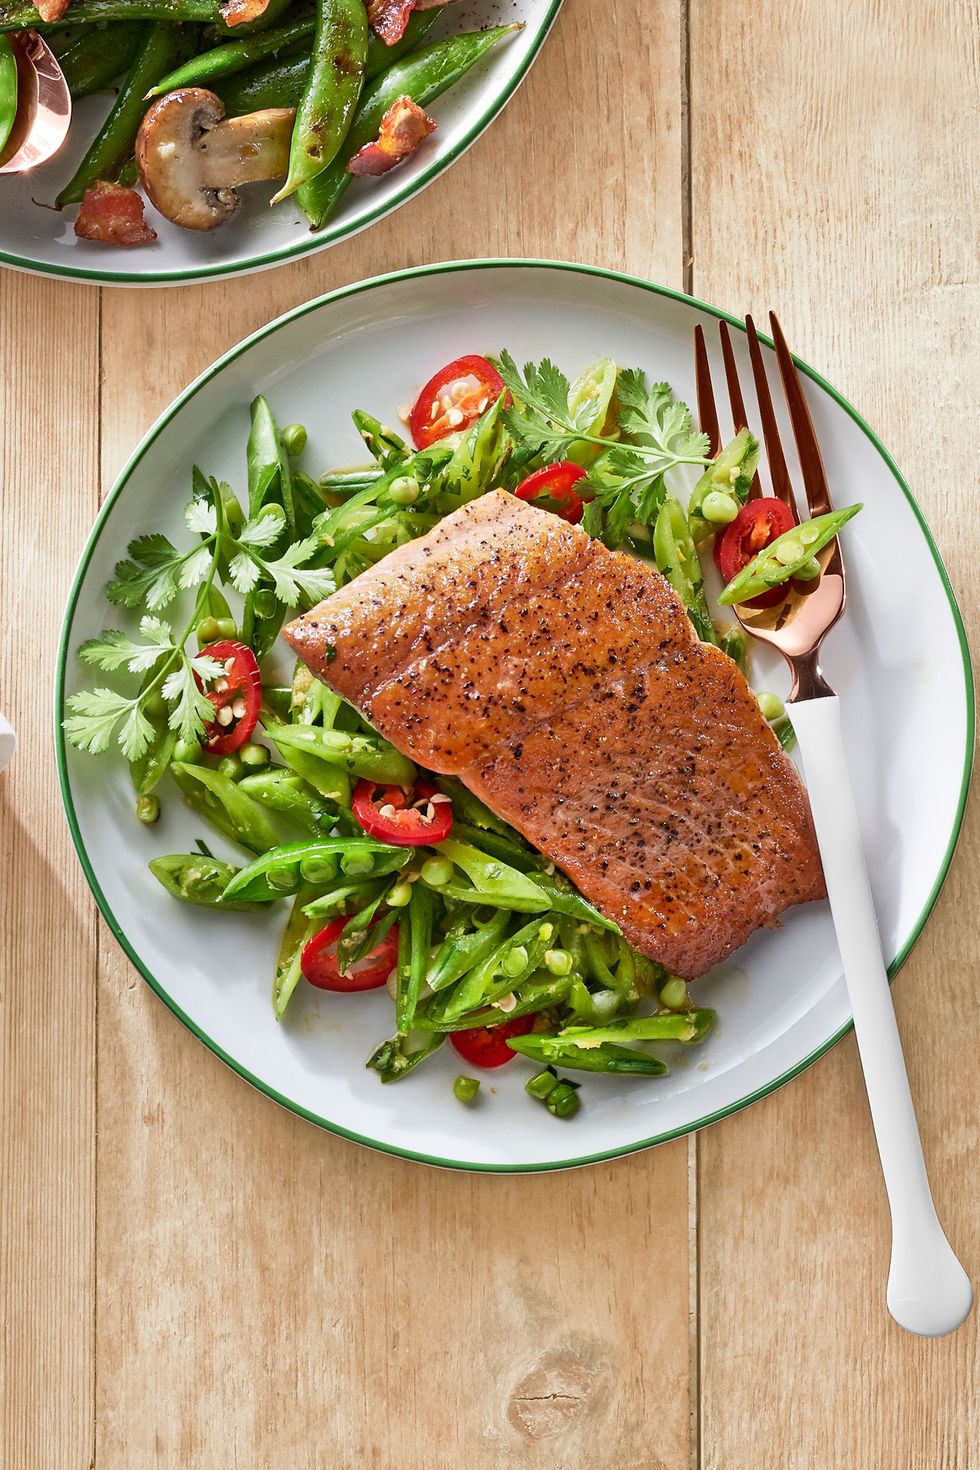 <p>Perfect voor de lichte eter.</p><p><a href="http://www.countryliving.com/food-drinks/recipes/a37755/gingery-snap-pea-slaw-with-seared-salmon-recipe/">Het volledige recept vind je hier.</a></p>